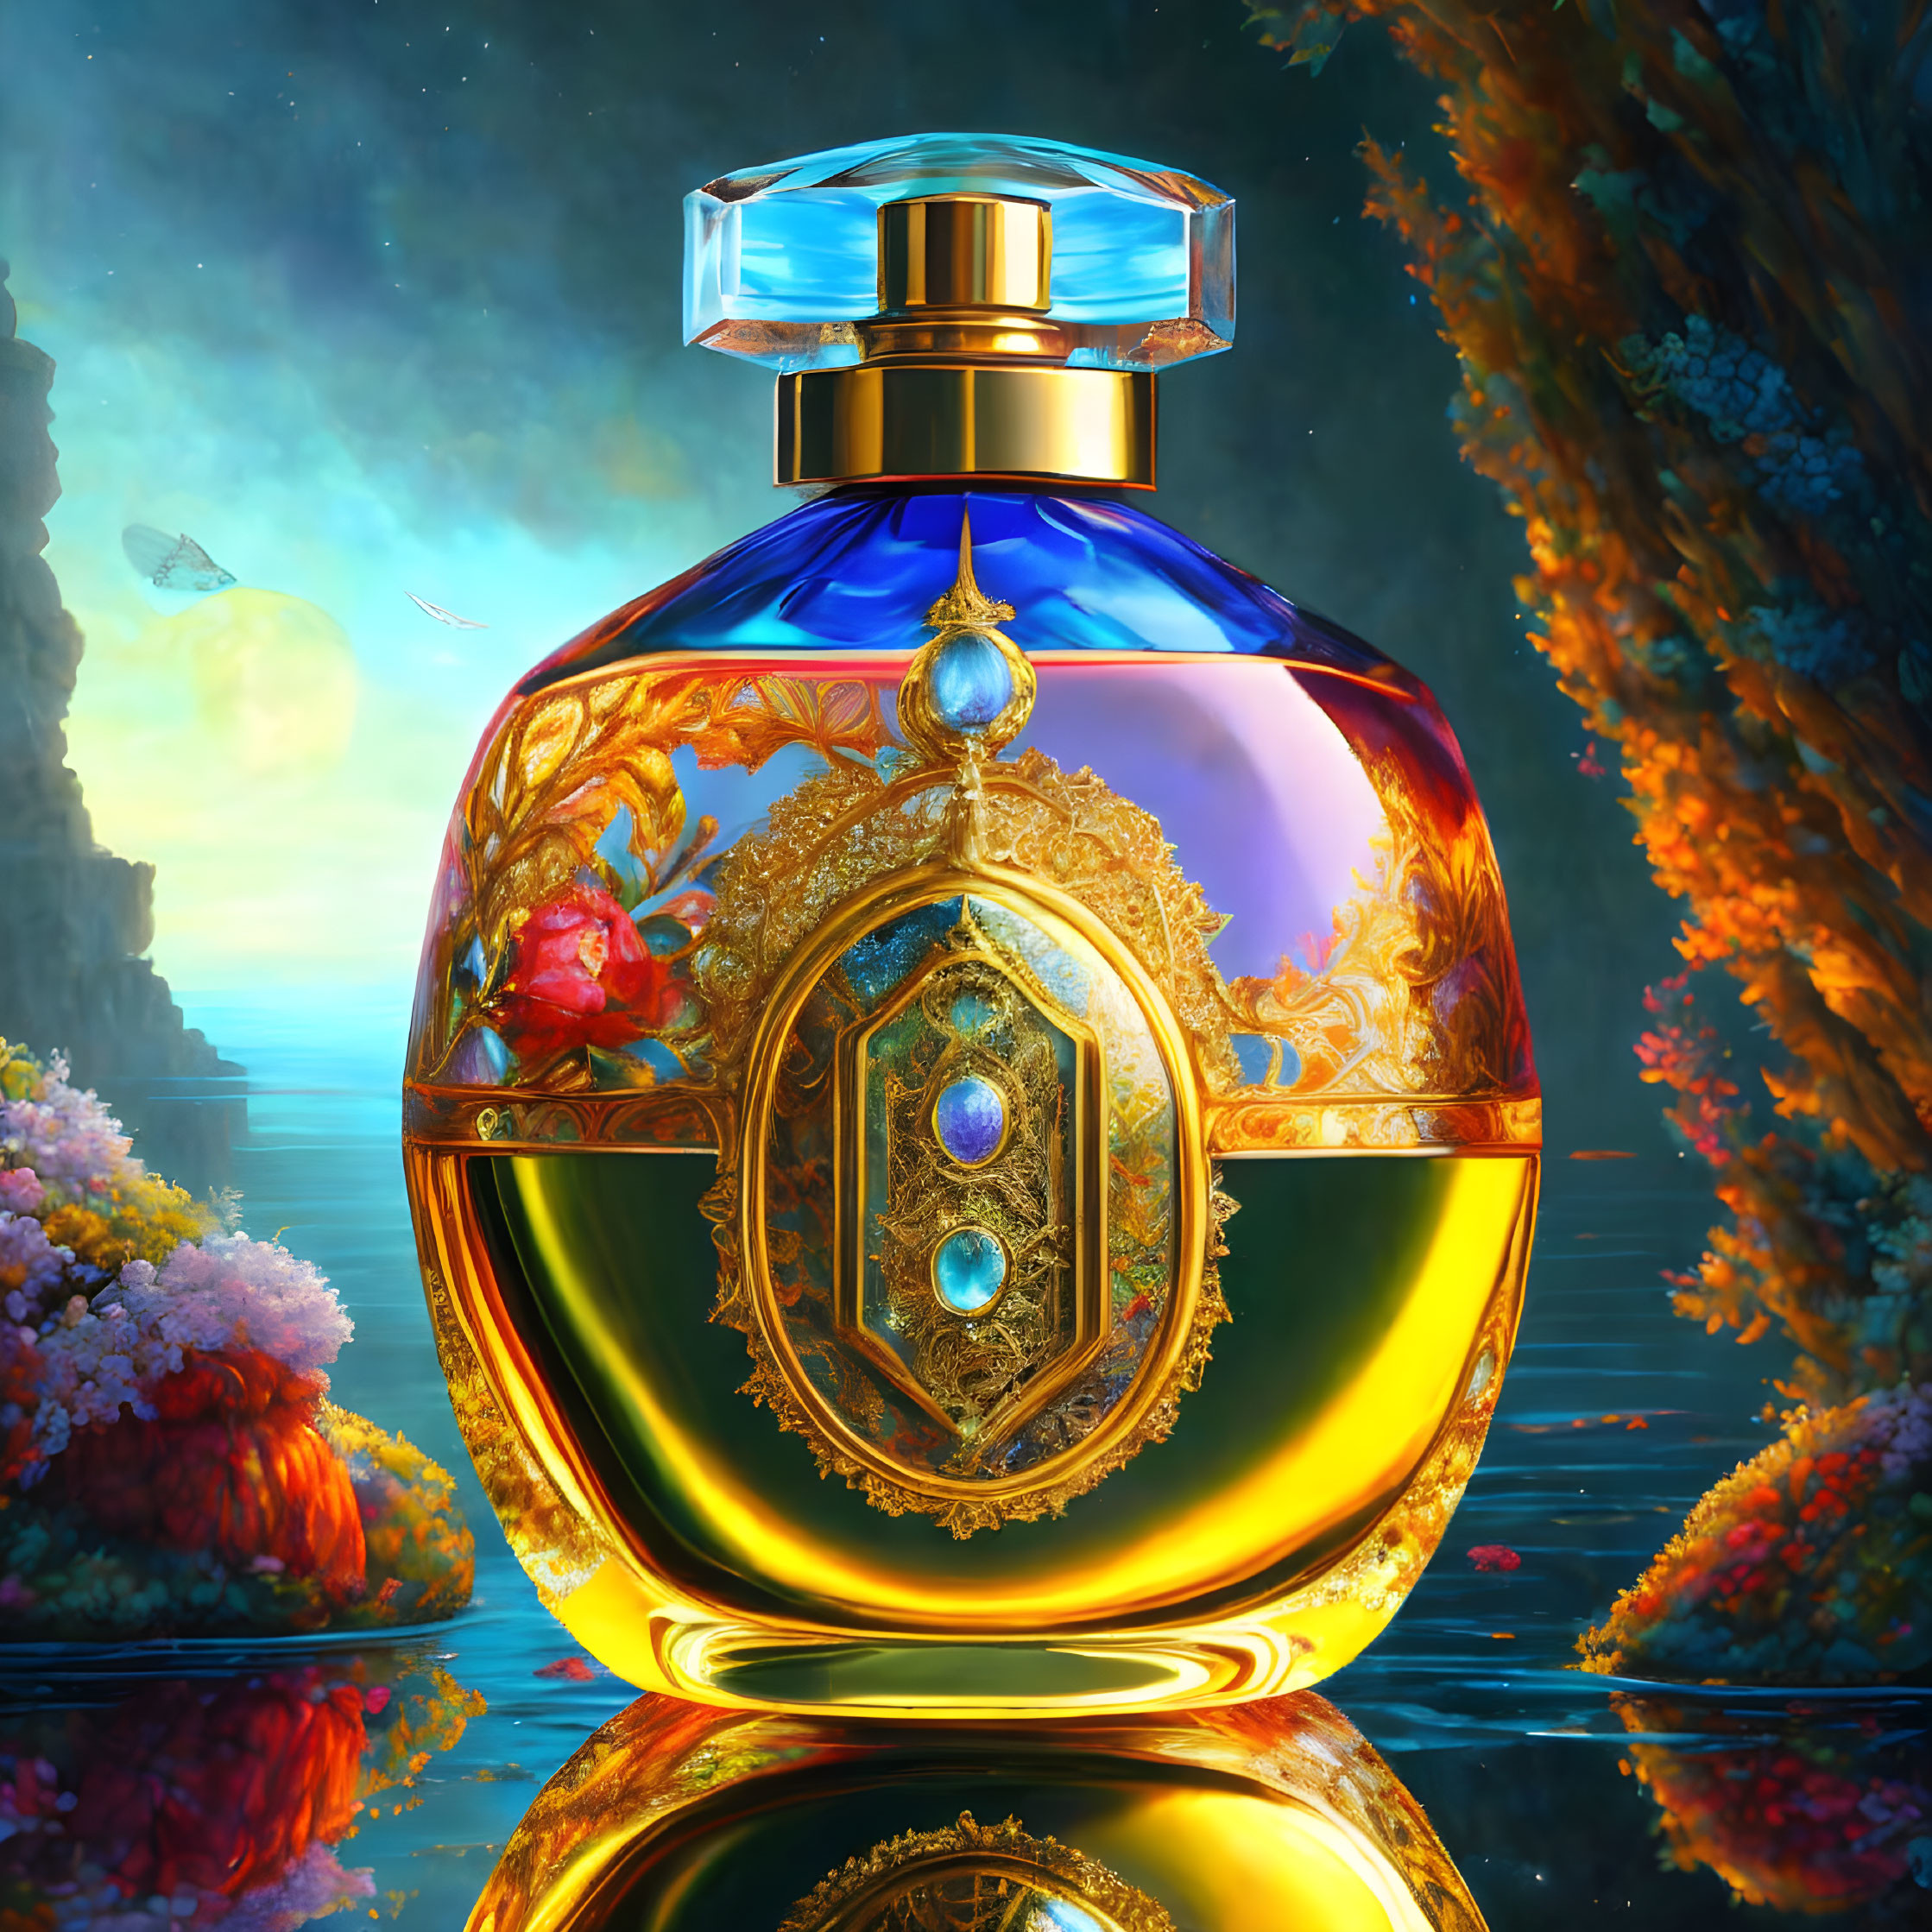 Intricate Gold and Jewel Perfume Bottle on Colorful Landscape